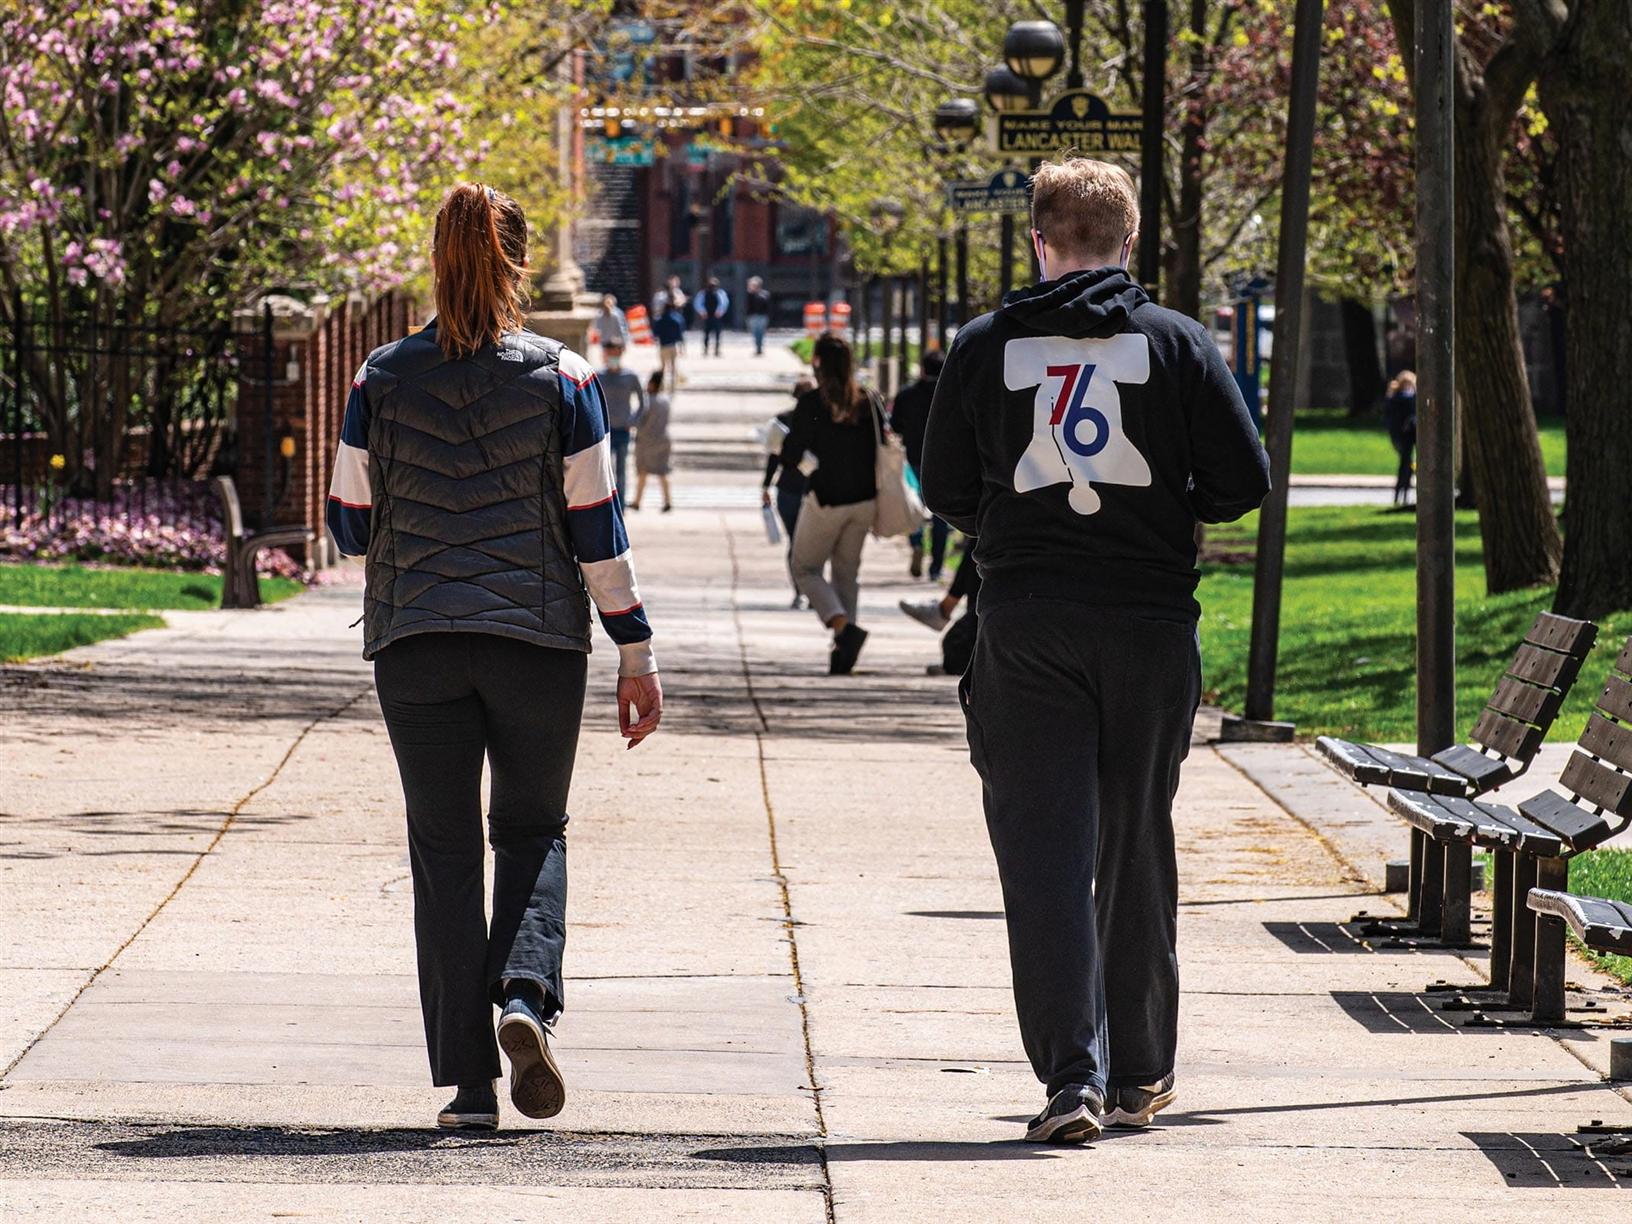 Two students safely enjoying a walk on campus.